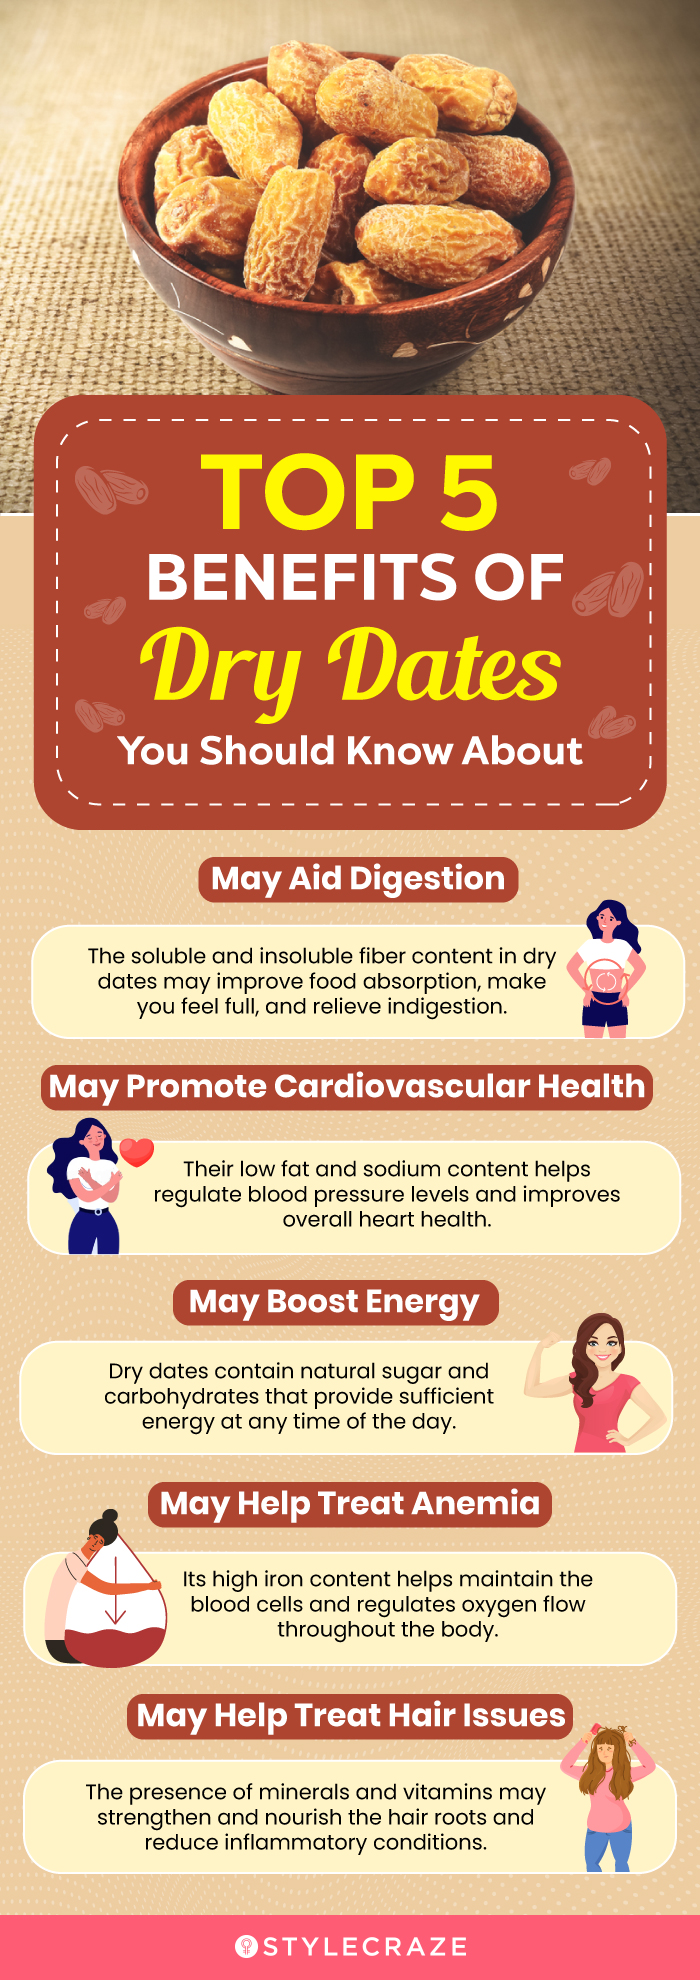 top 5 benefits of dry dates you should know about (infographic)